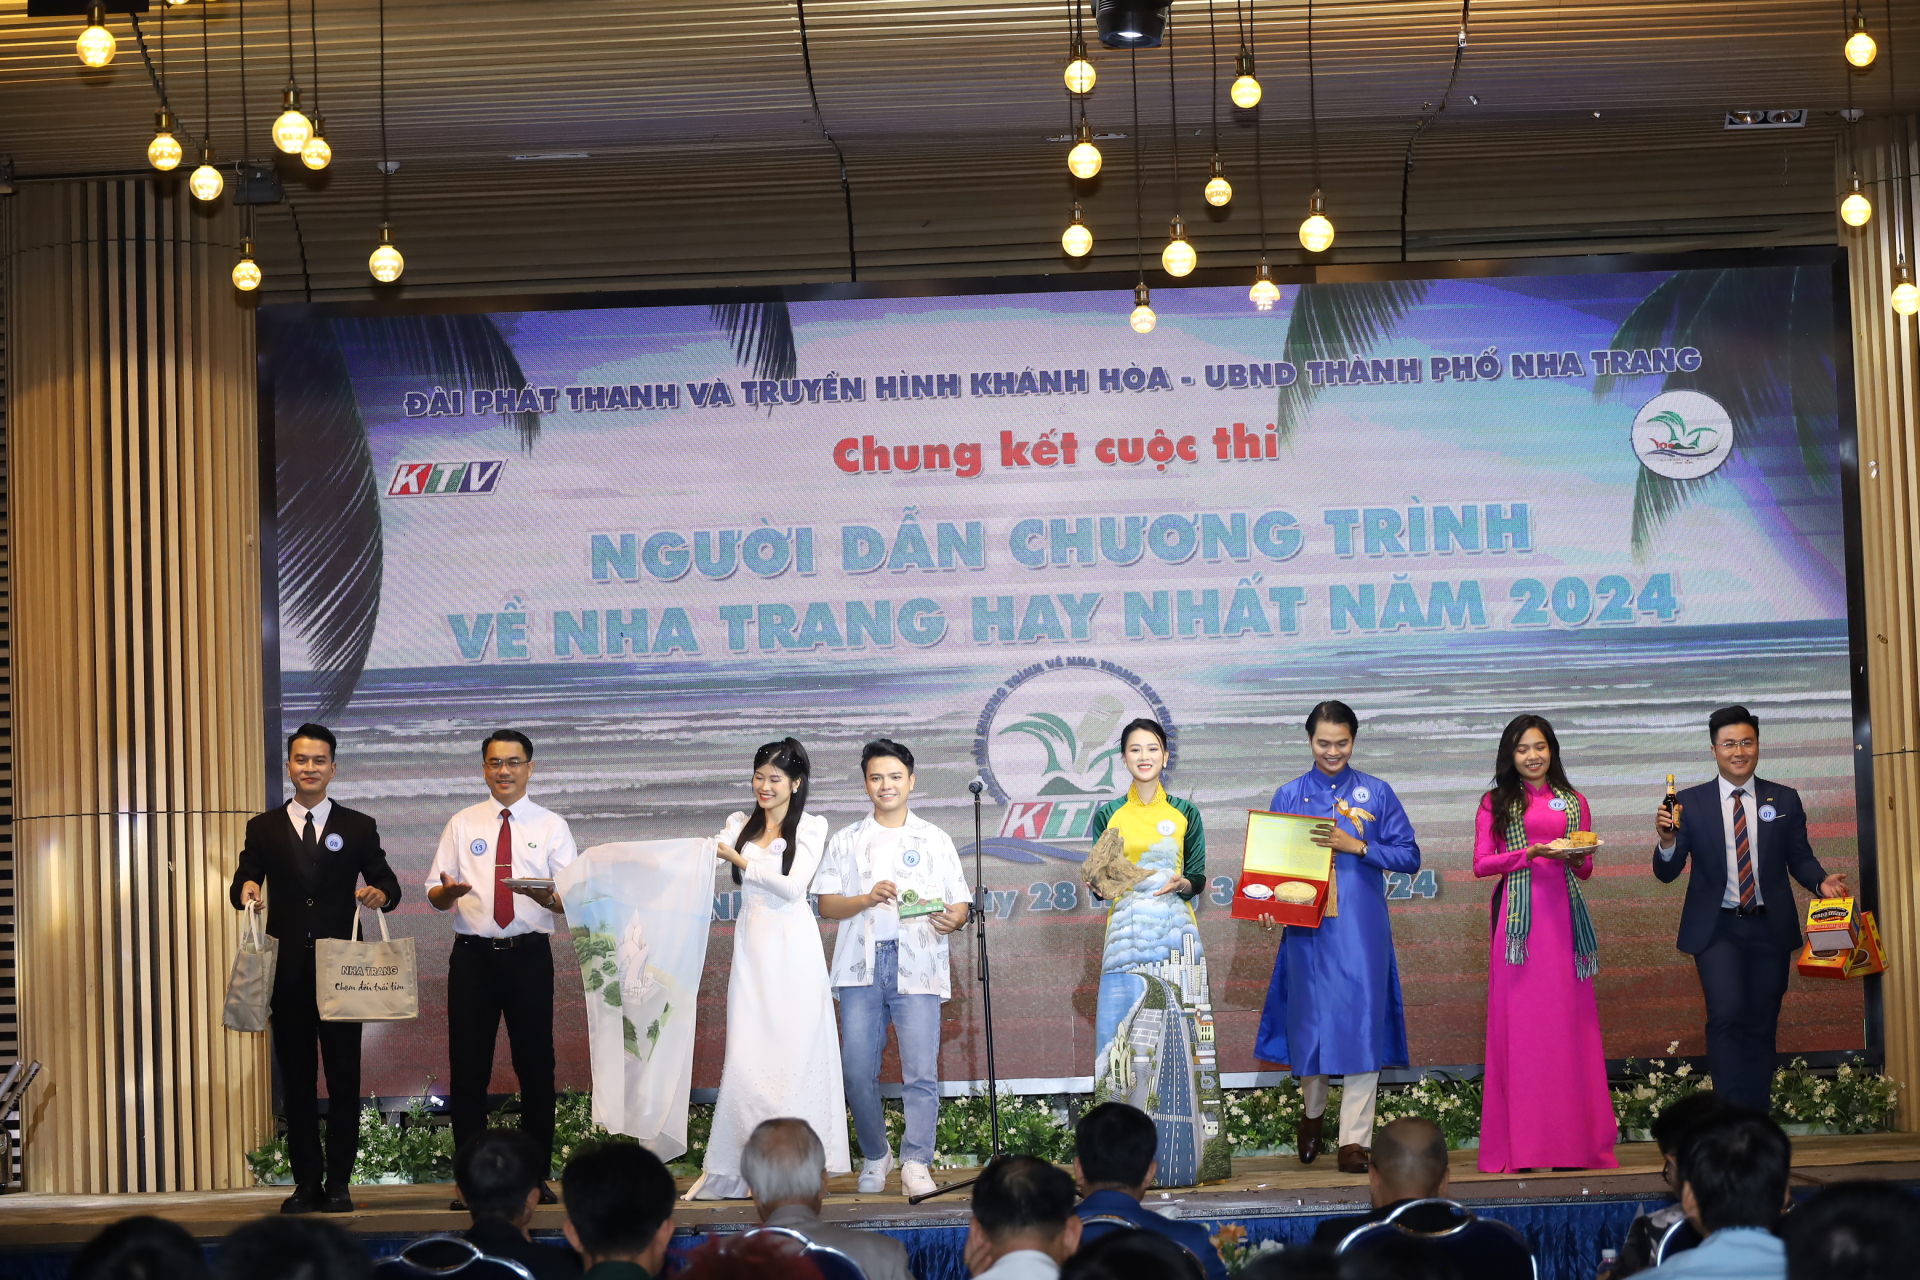 The finalists introducing typical products of Nha Trang

